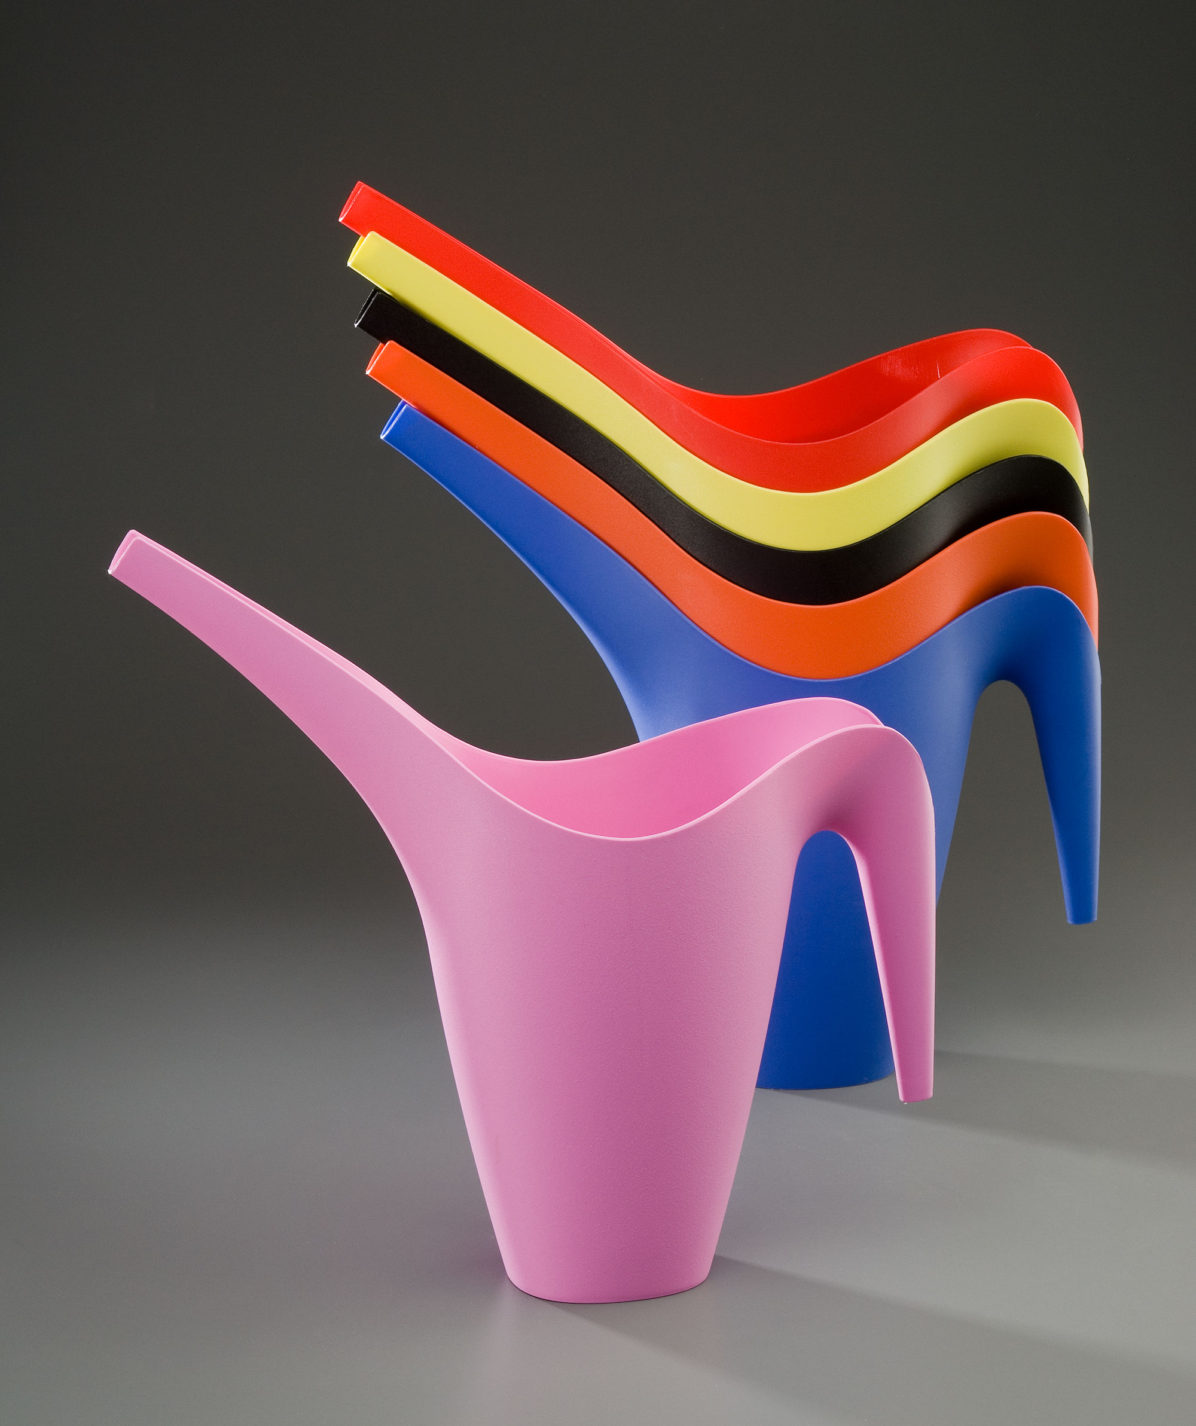 Six watering cans with long swooping handles and spouts. Each is a different color: pink, blue, orange, yellow, black, and red.